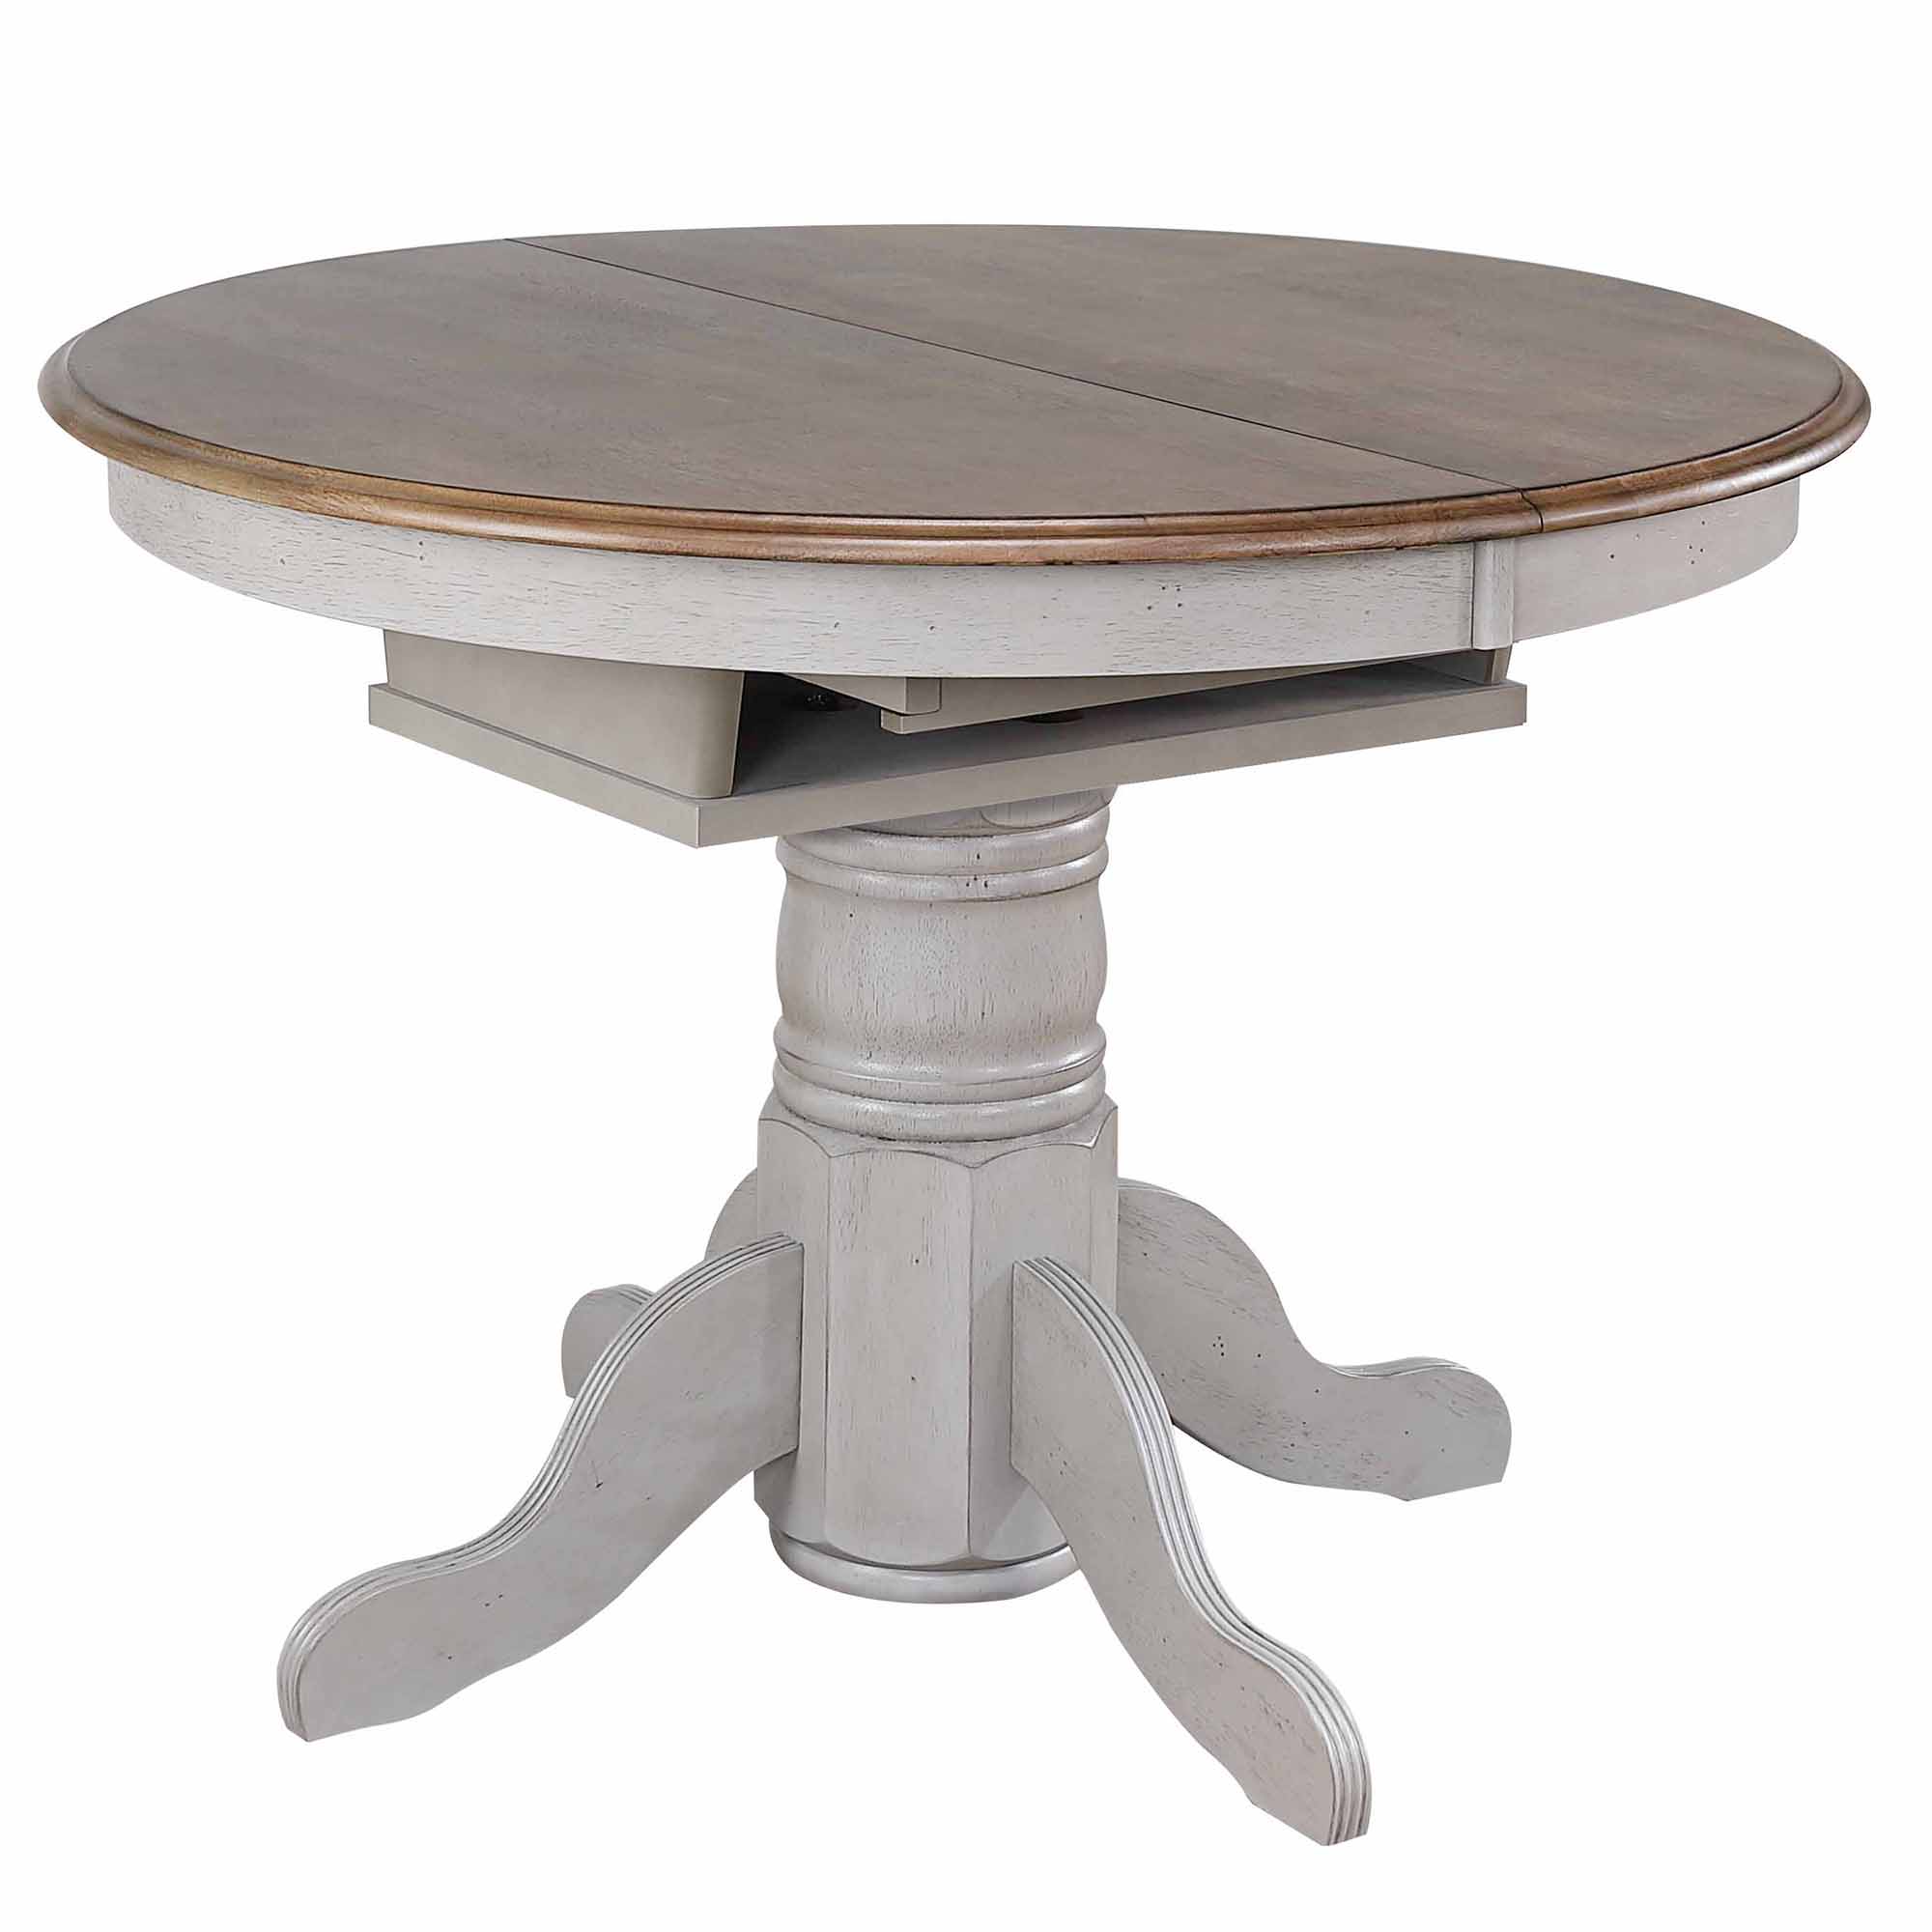 Country Grove Round/Oval Butterfly Leaf Dining Table - Gray Oak ...